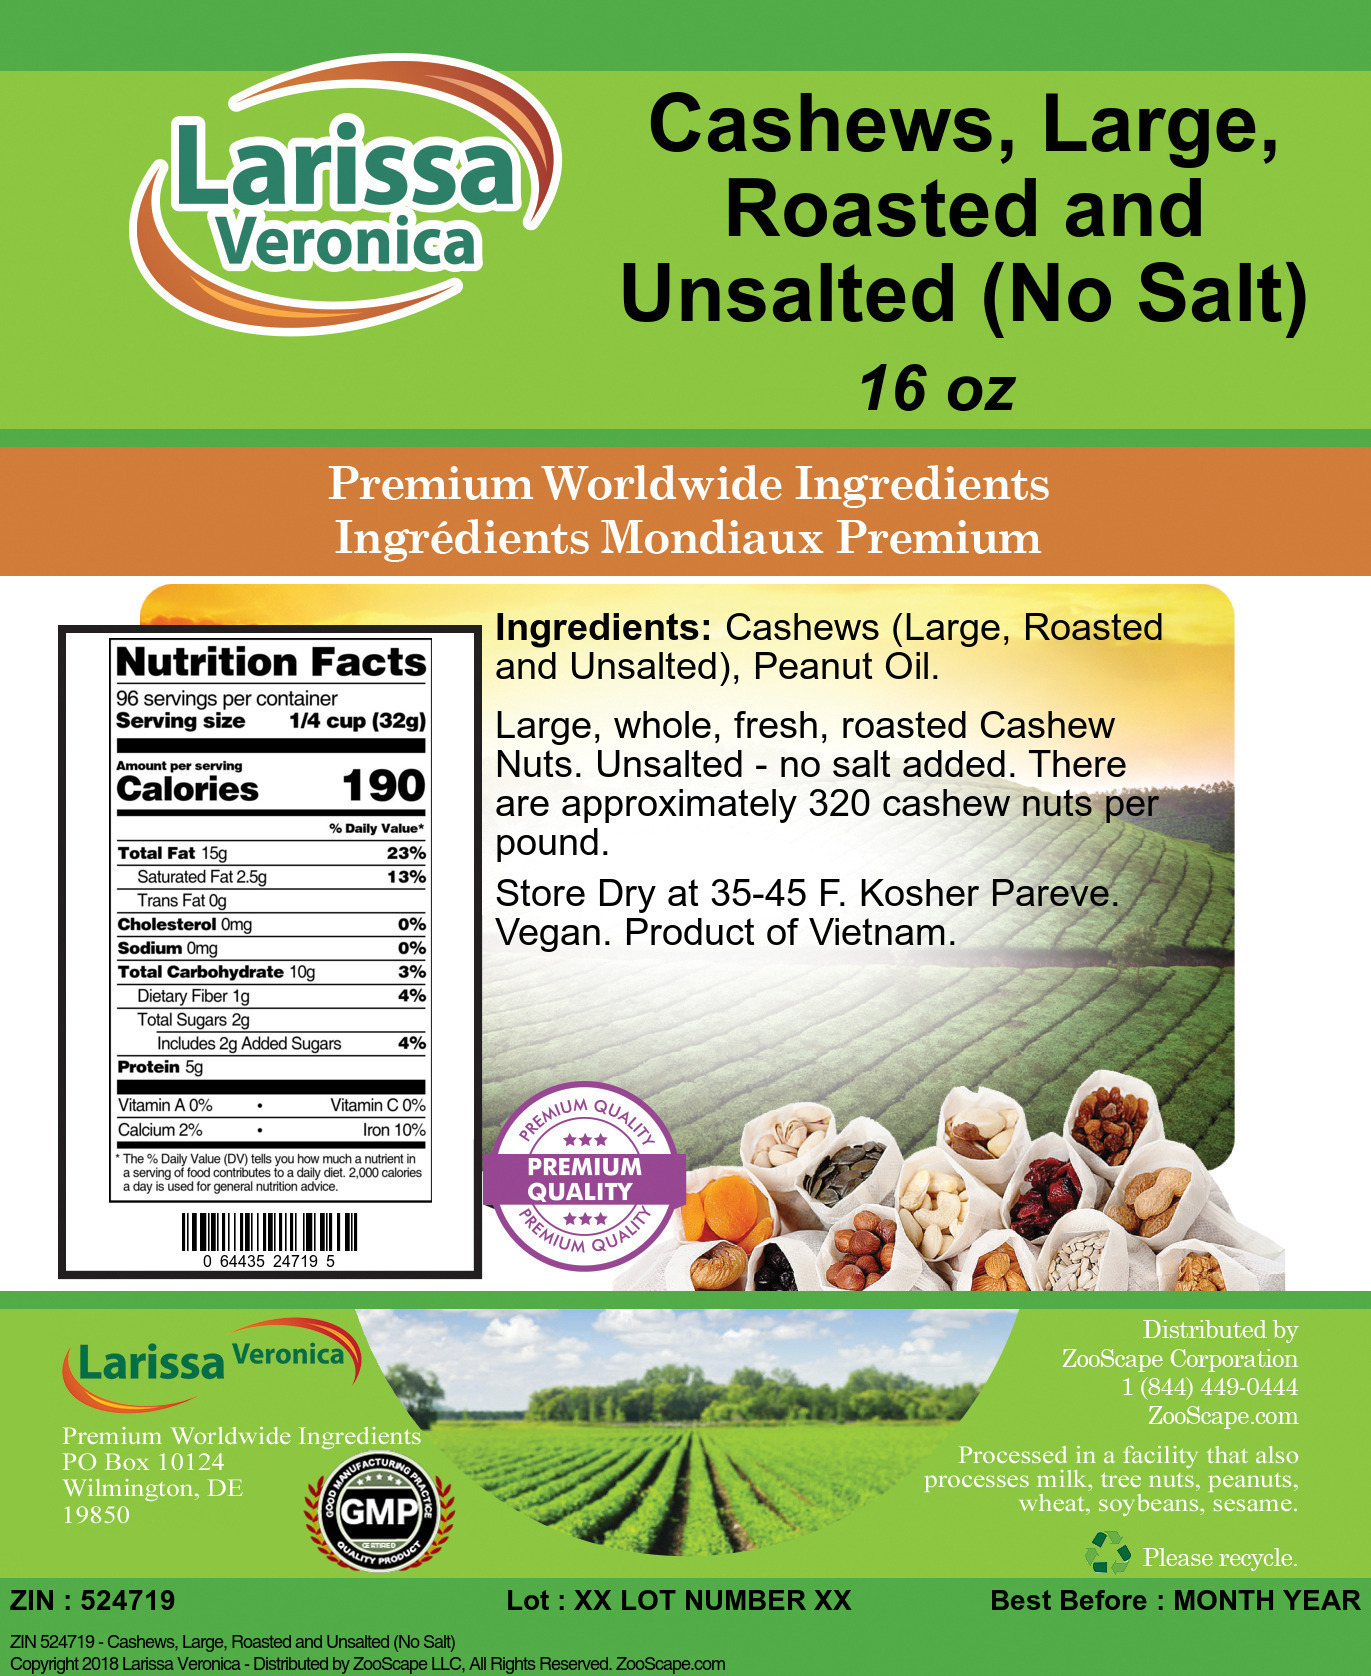 Cashews, Large, Roasted and Unsalted (No Salt) - Label